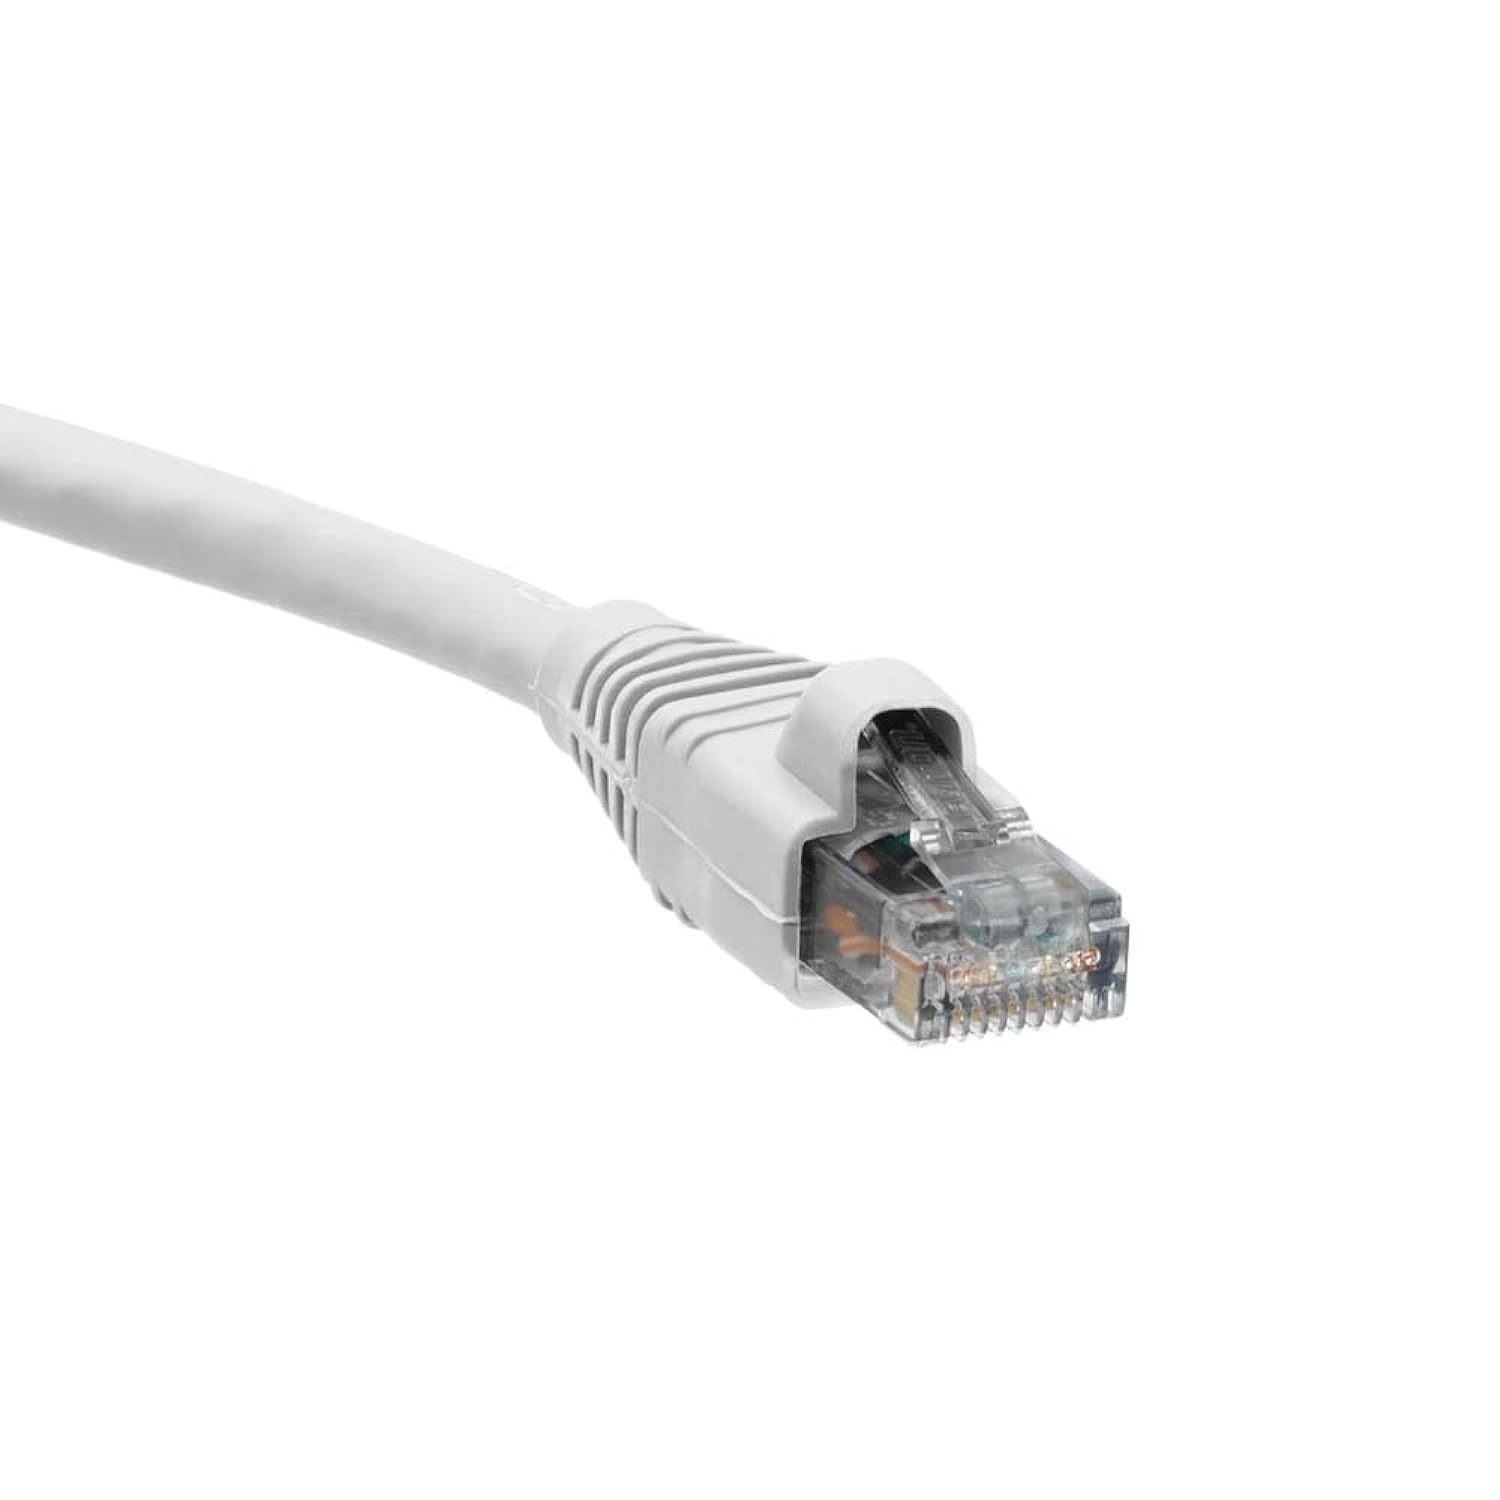 Leviton 62460-10W eXtreme 6+ Standard Patch Cord, CAT 6, 10-Foot Length, White - $16.99